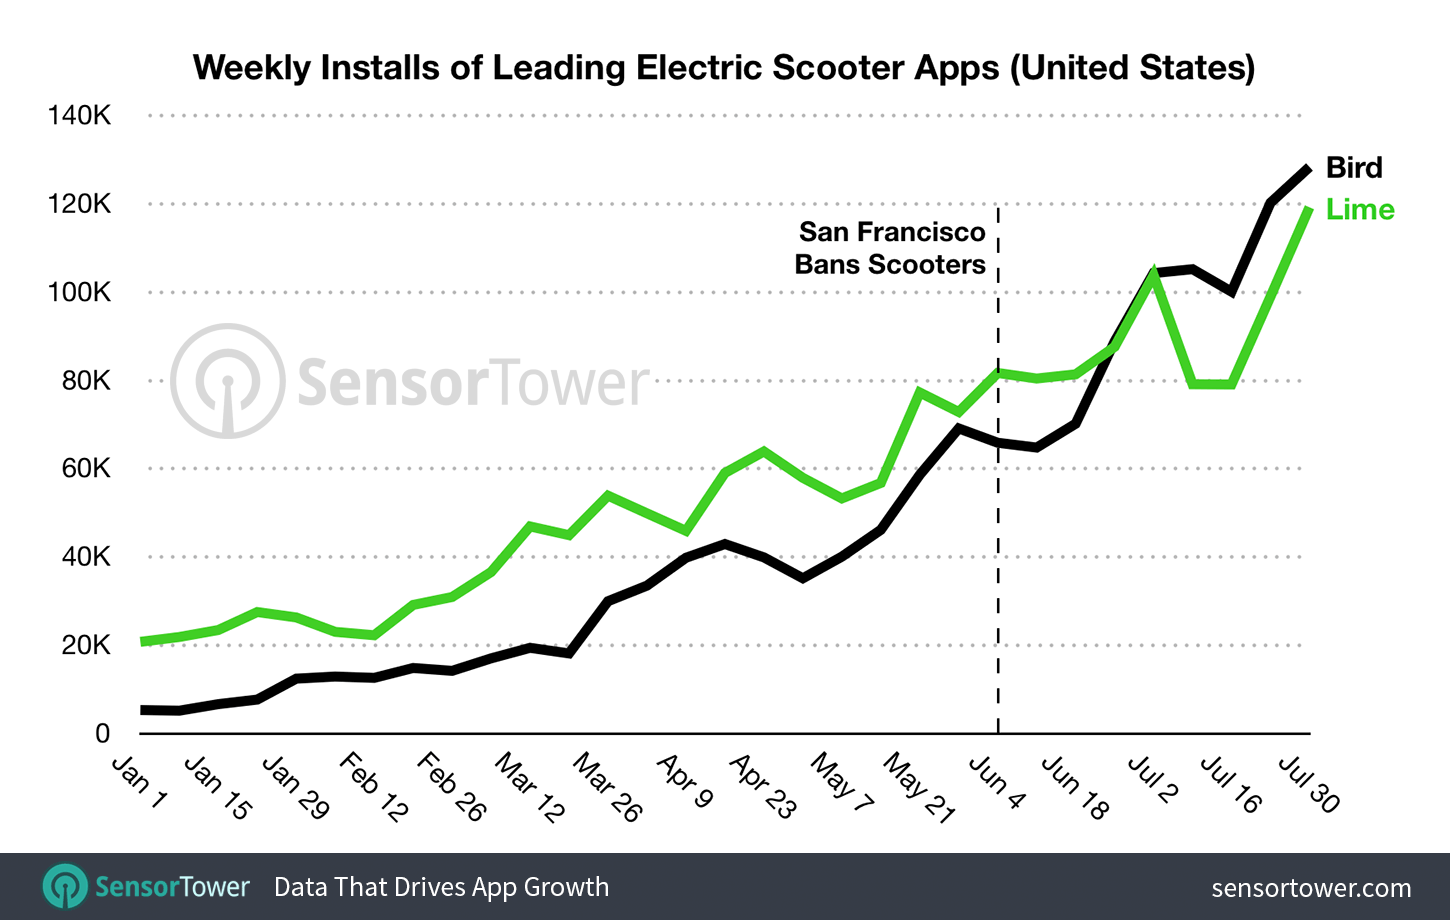 Chart showing weekly downloads of top electric scooter apps in the United States for 2018